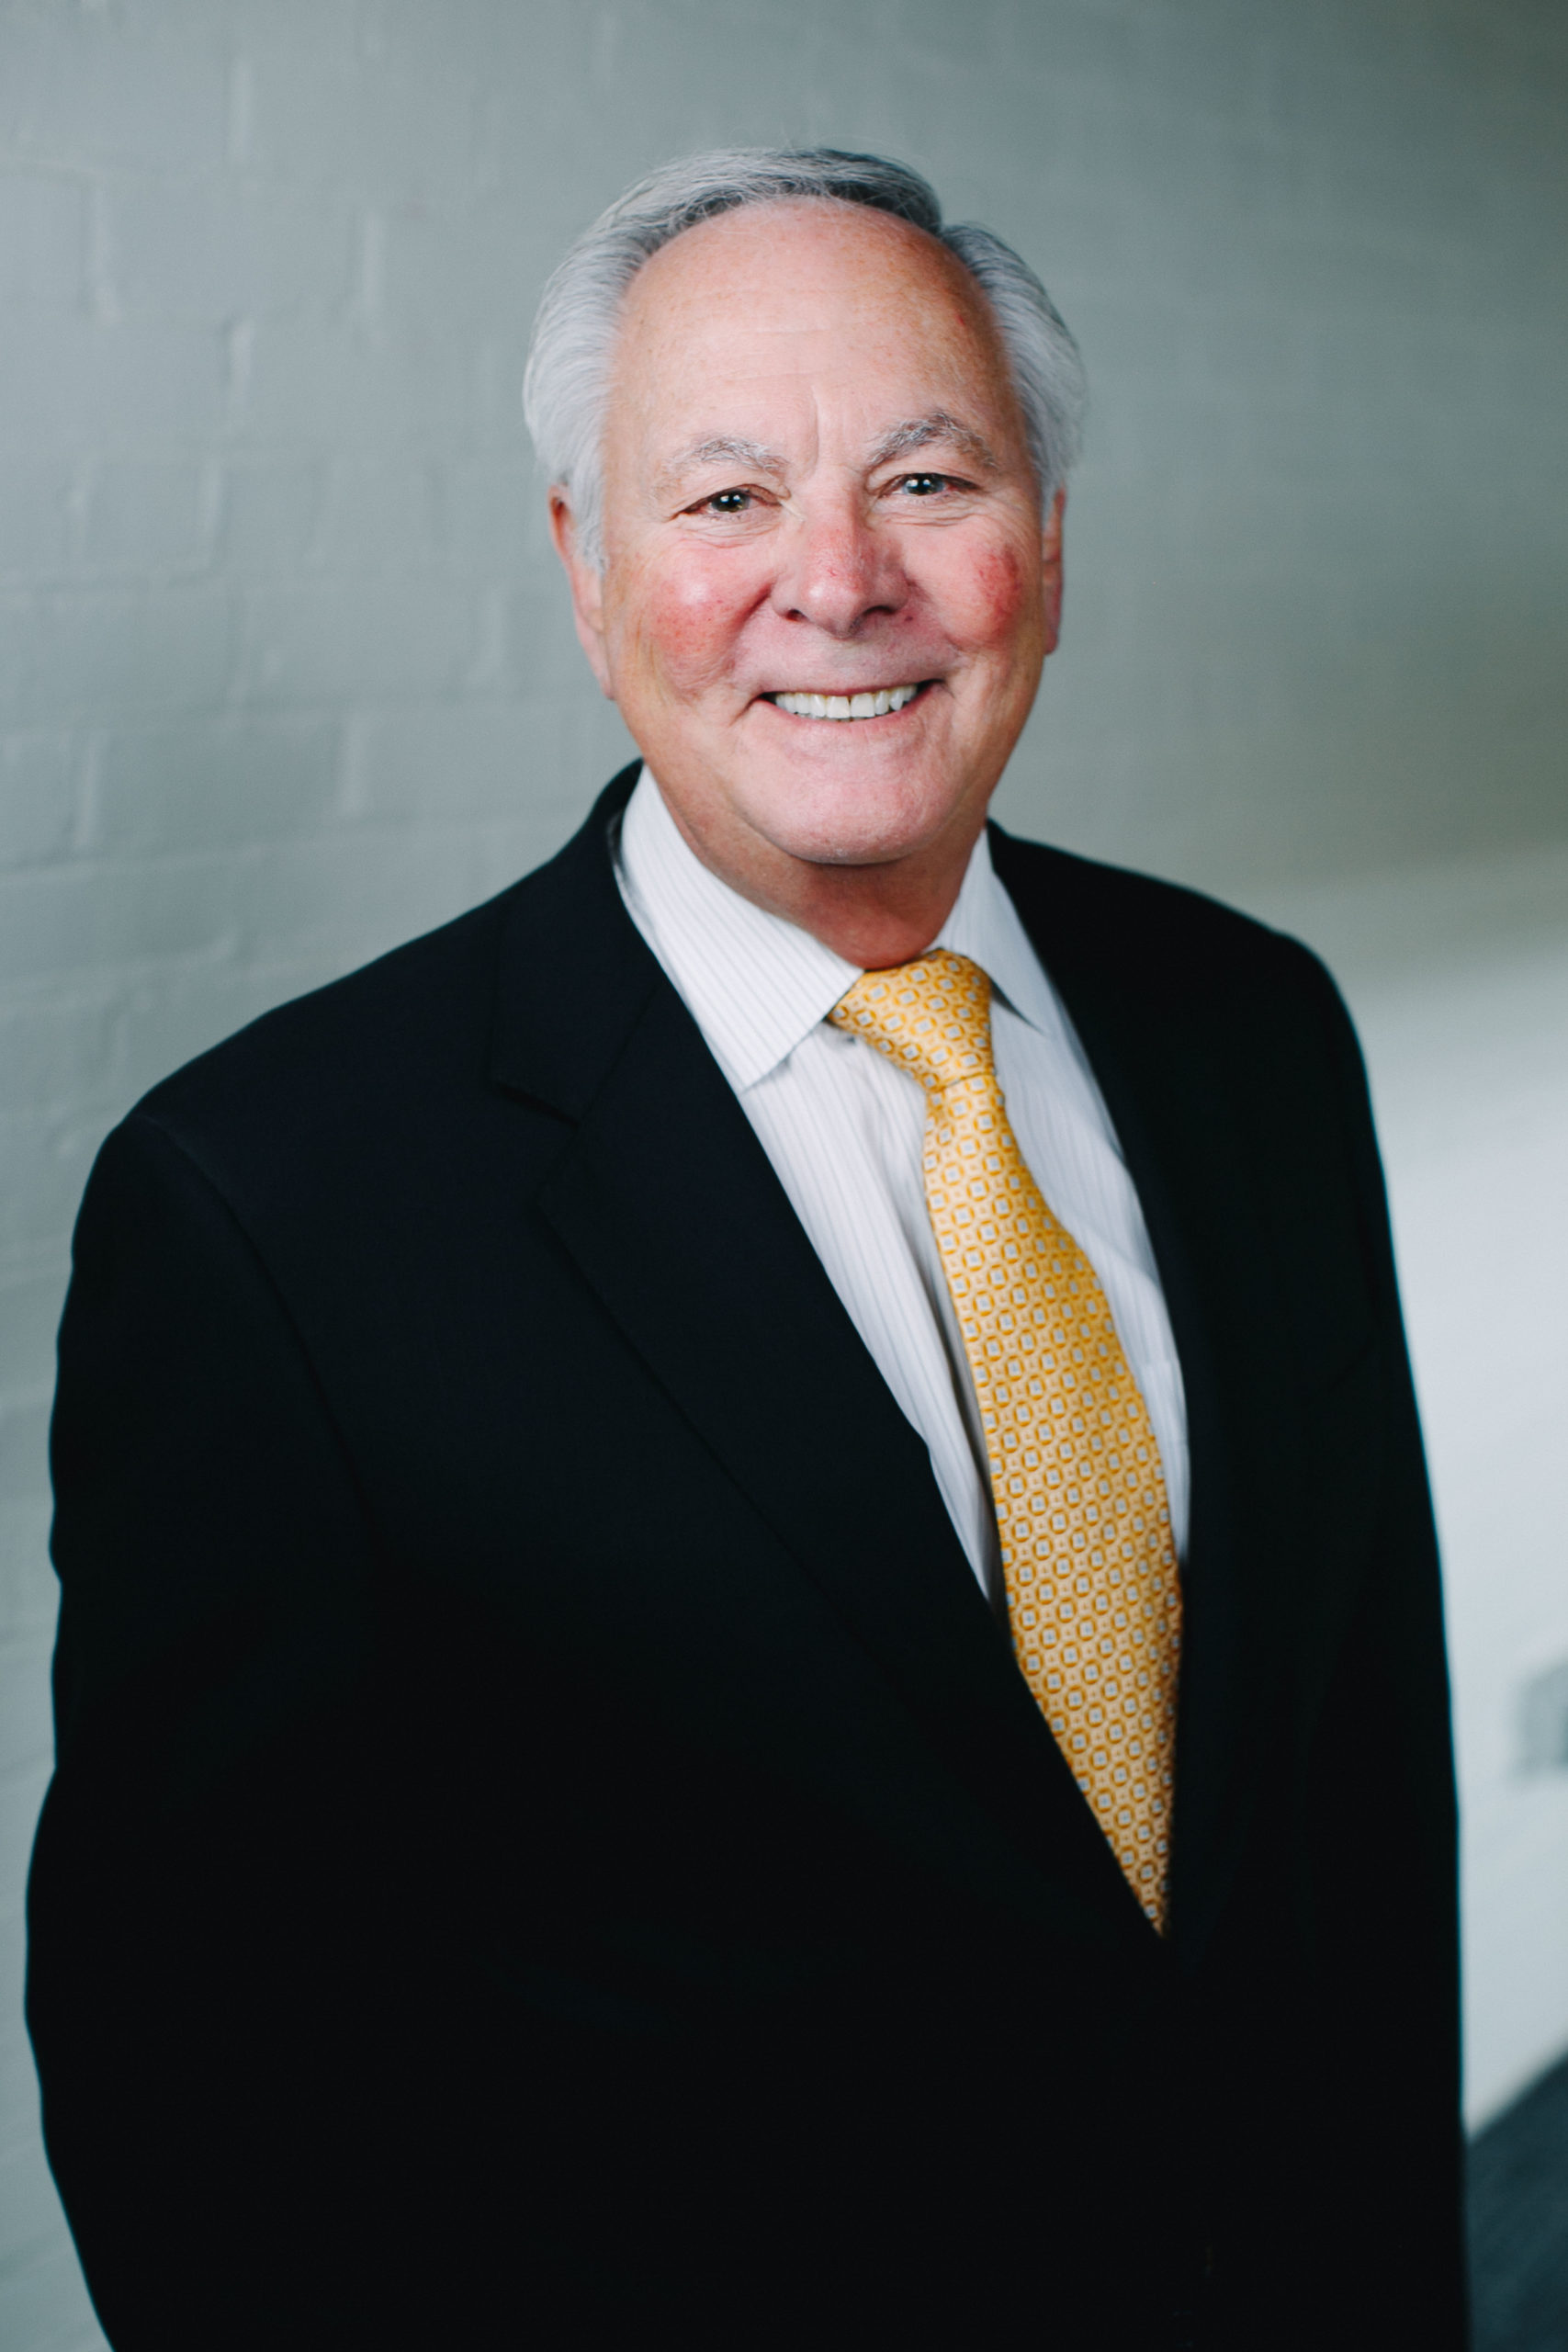 Jeffrey Coopersmith - Chairman and Founder